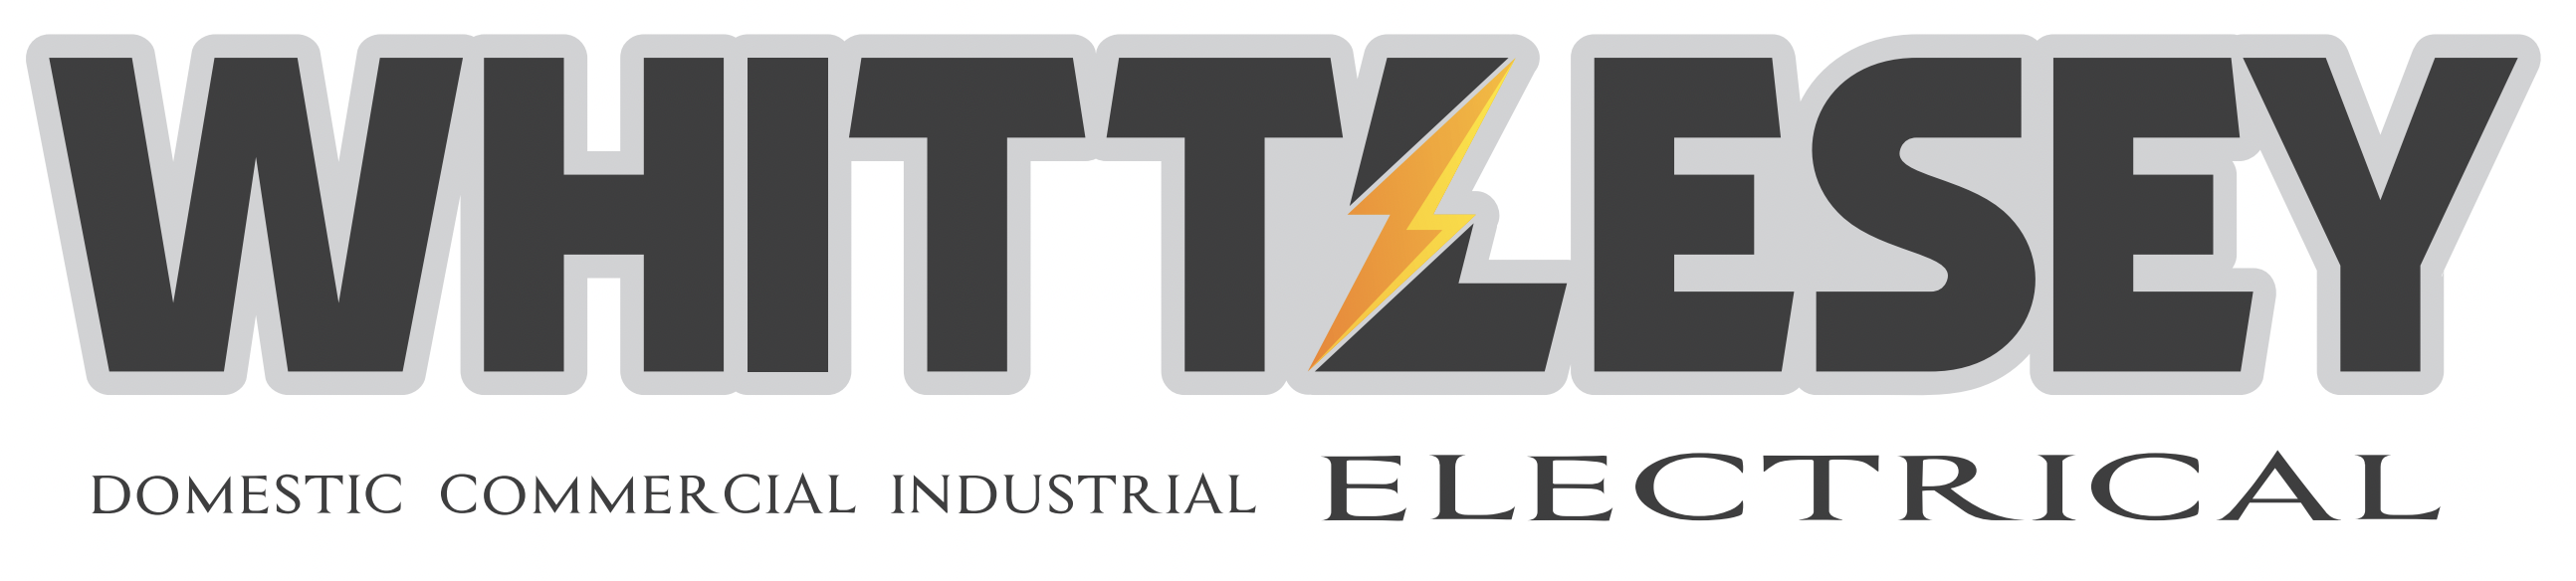 Whittlesey Electrical